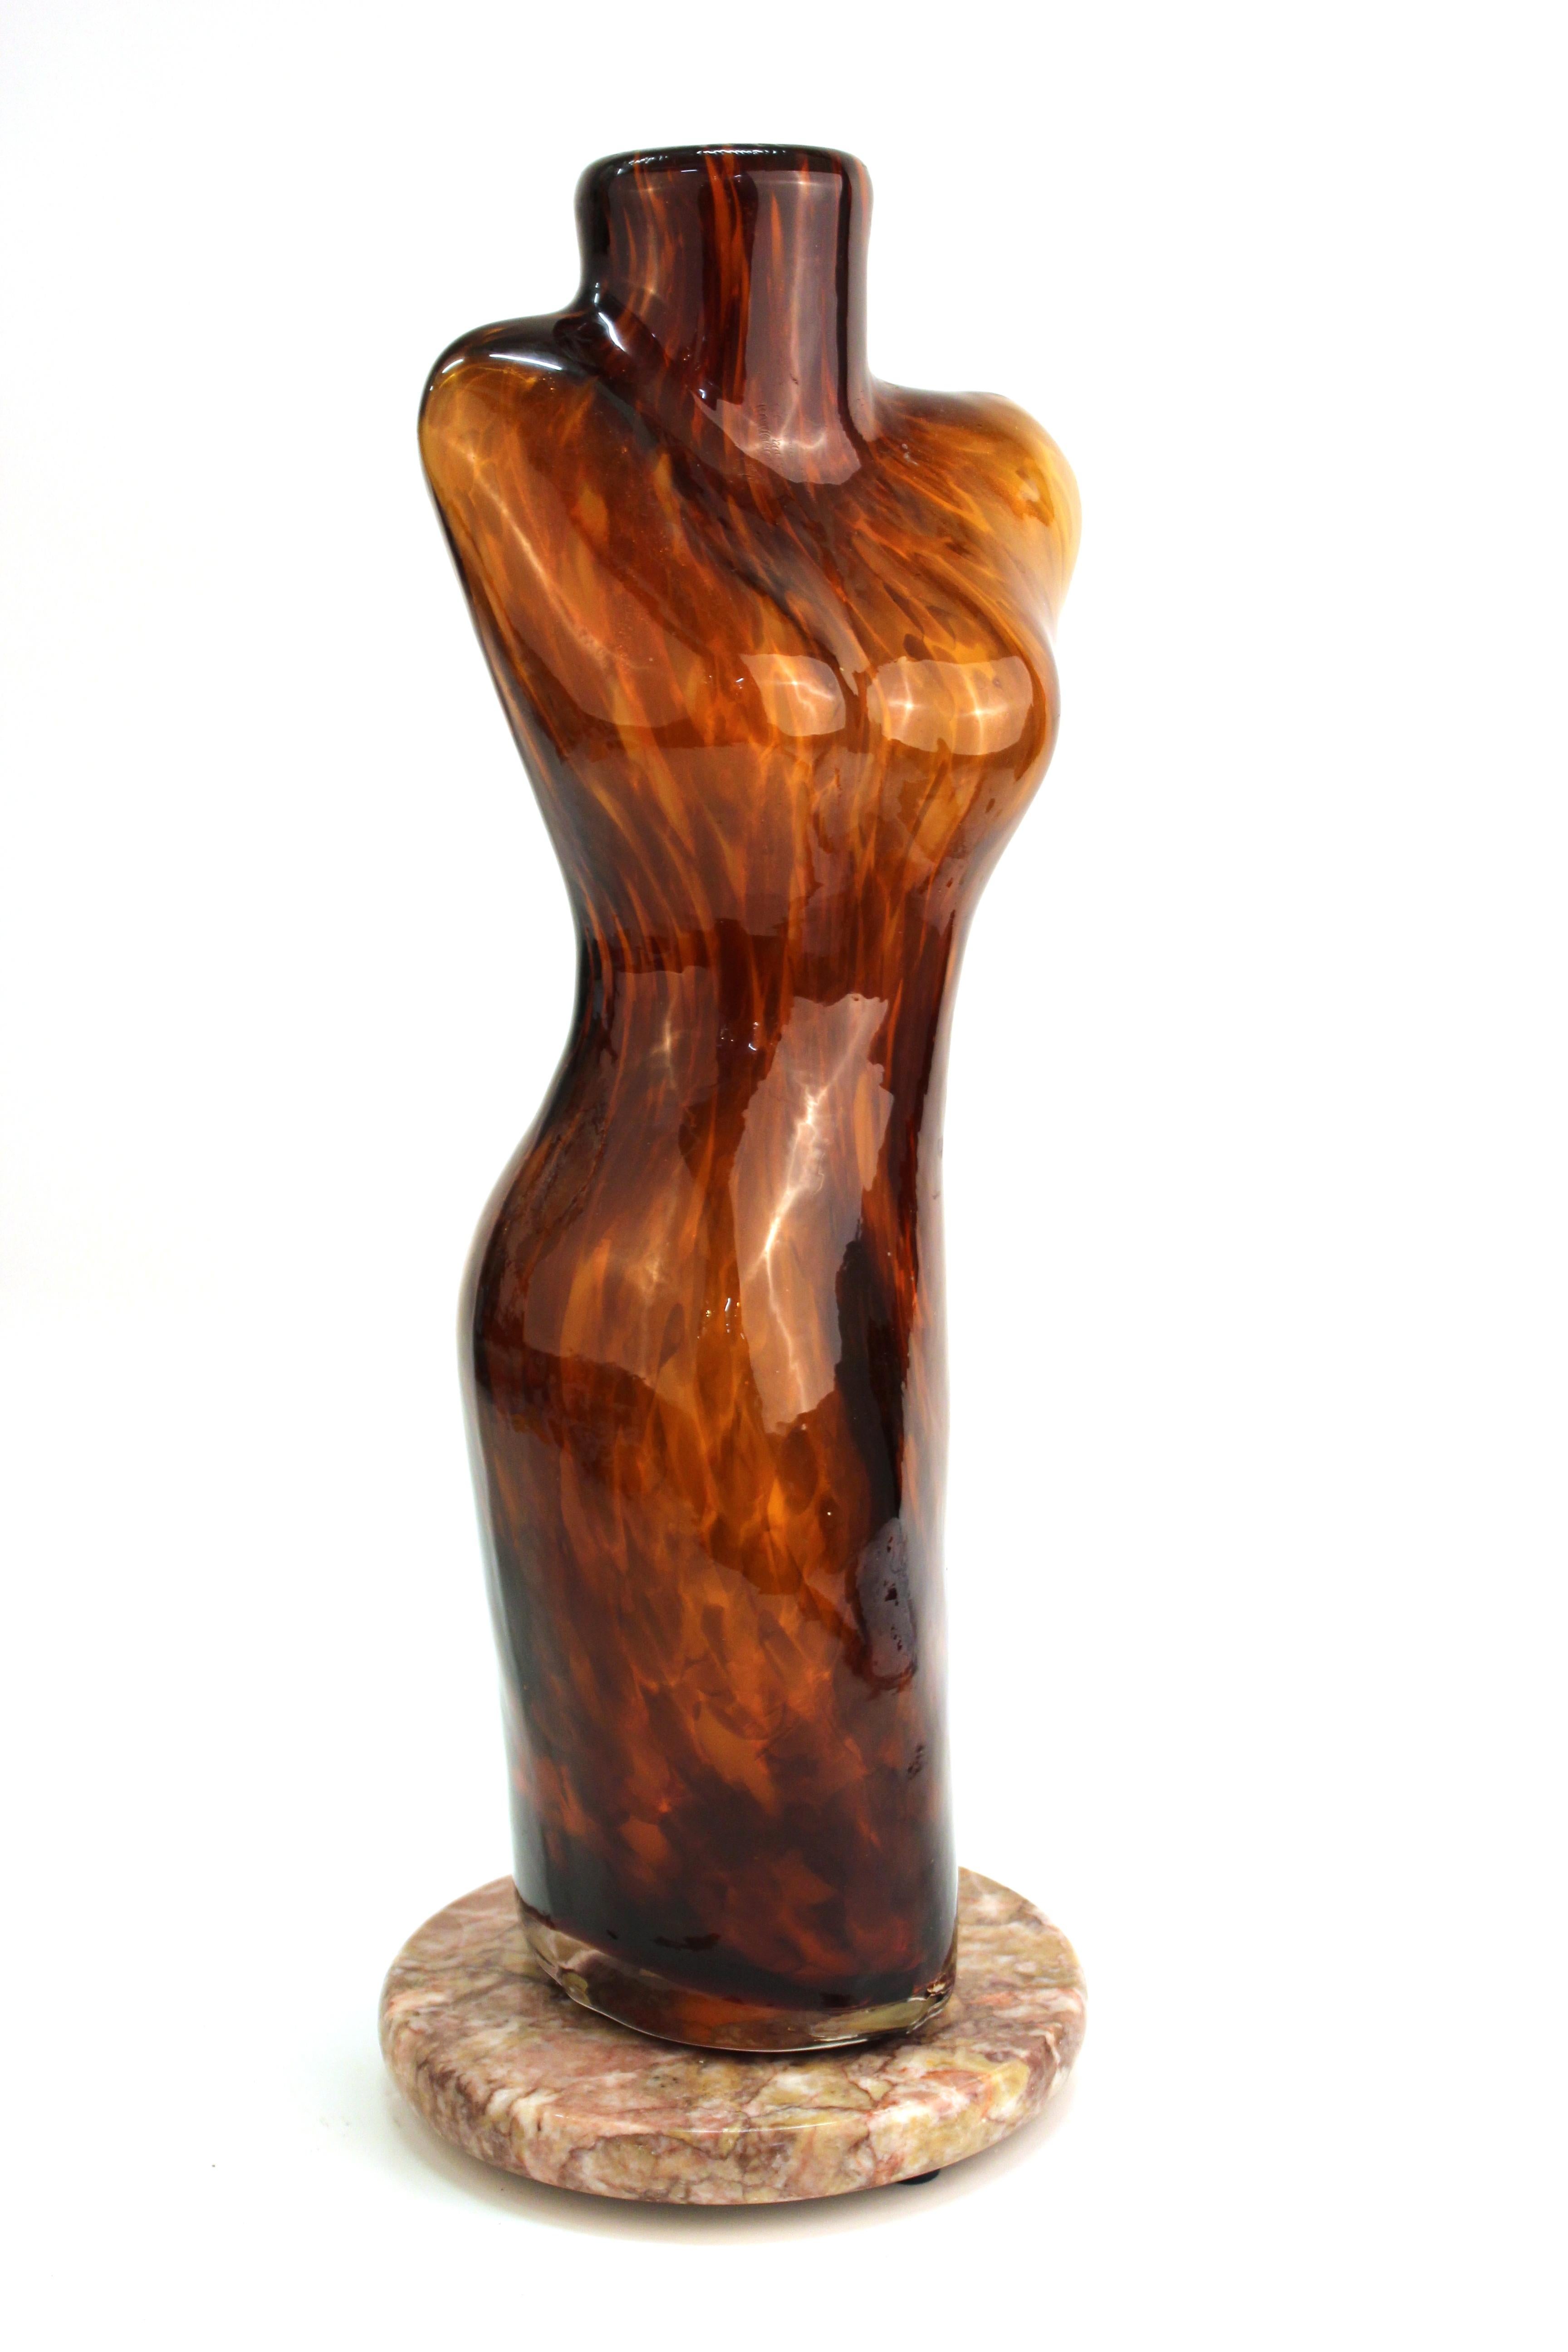 Italian modern Murano art glass sculptural vase in shape of a female torso. The piece was likely manufactured during the 1980s and has gold inclusions. Mounted atop a circular stone base, the piece is in great vintage condition with age-appropriate